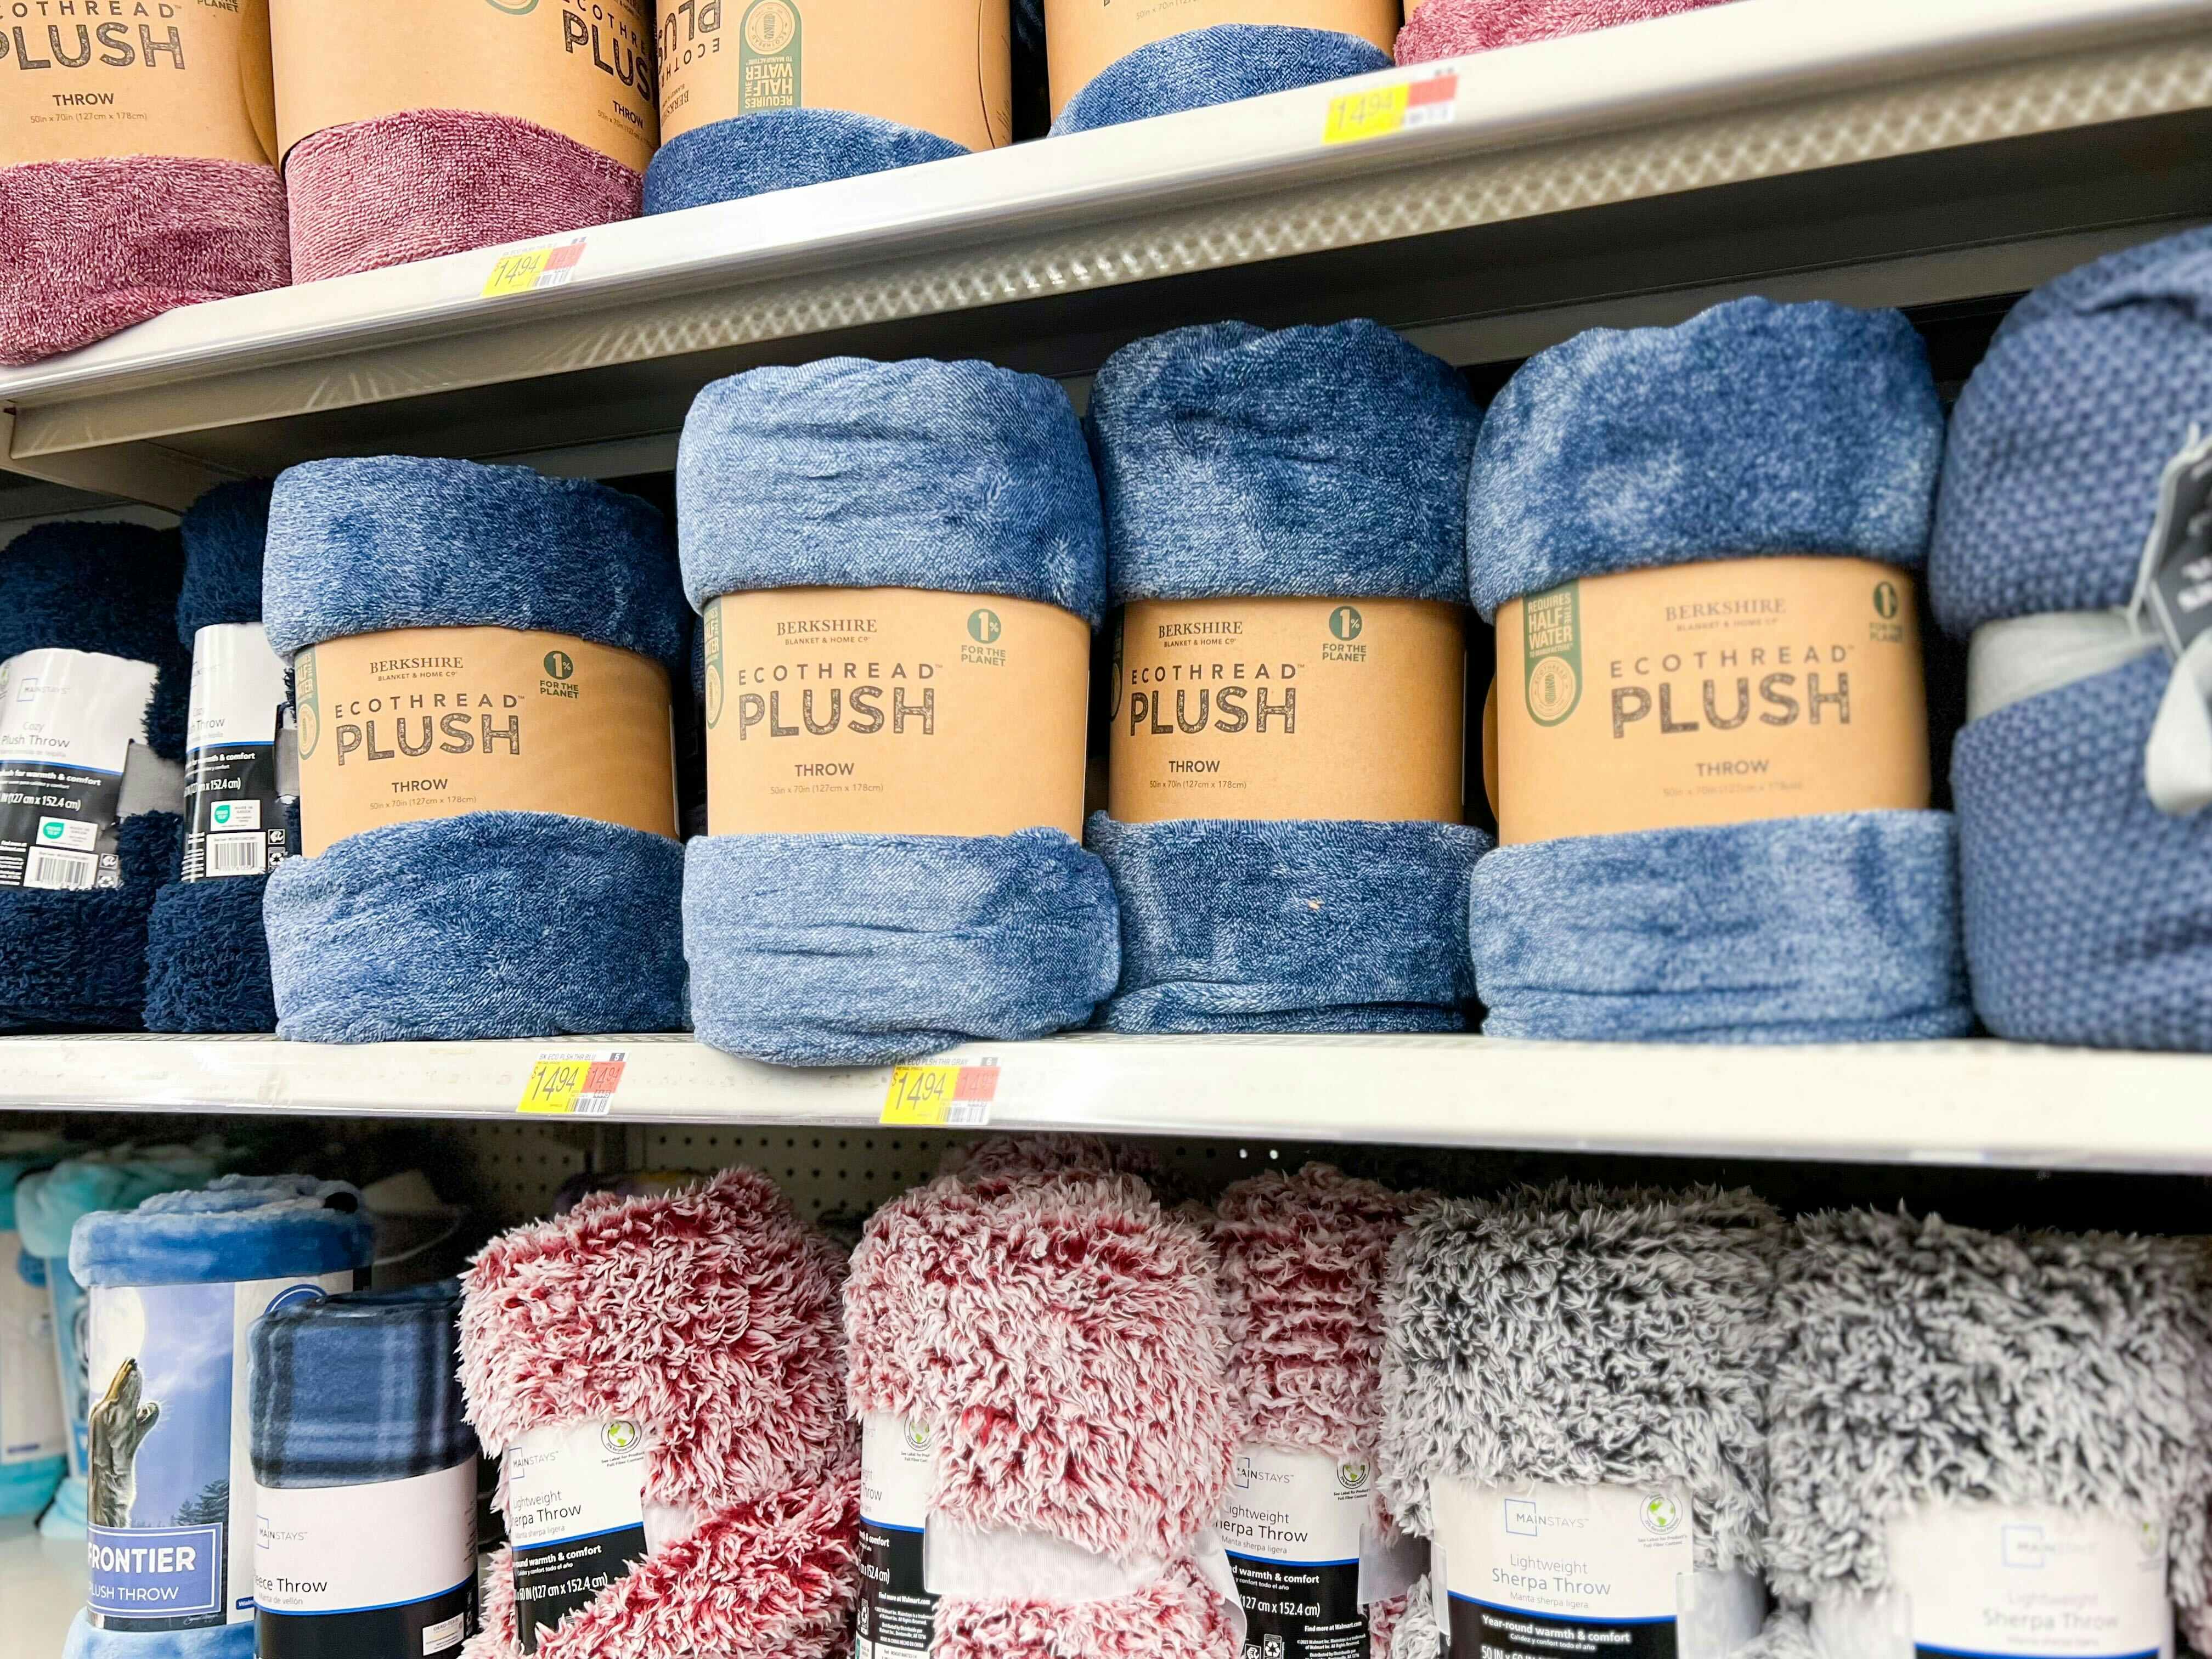 Cheap Blankets at Walmart: Prices Start at Only $5 (Up to 75% Off)